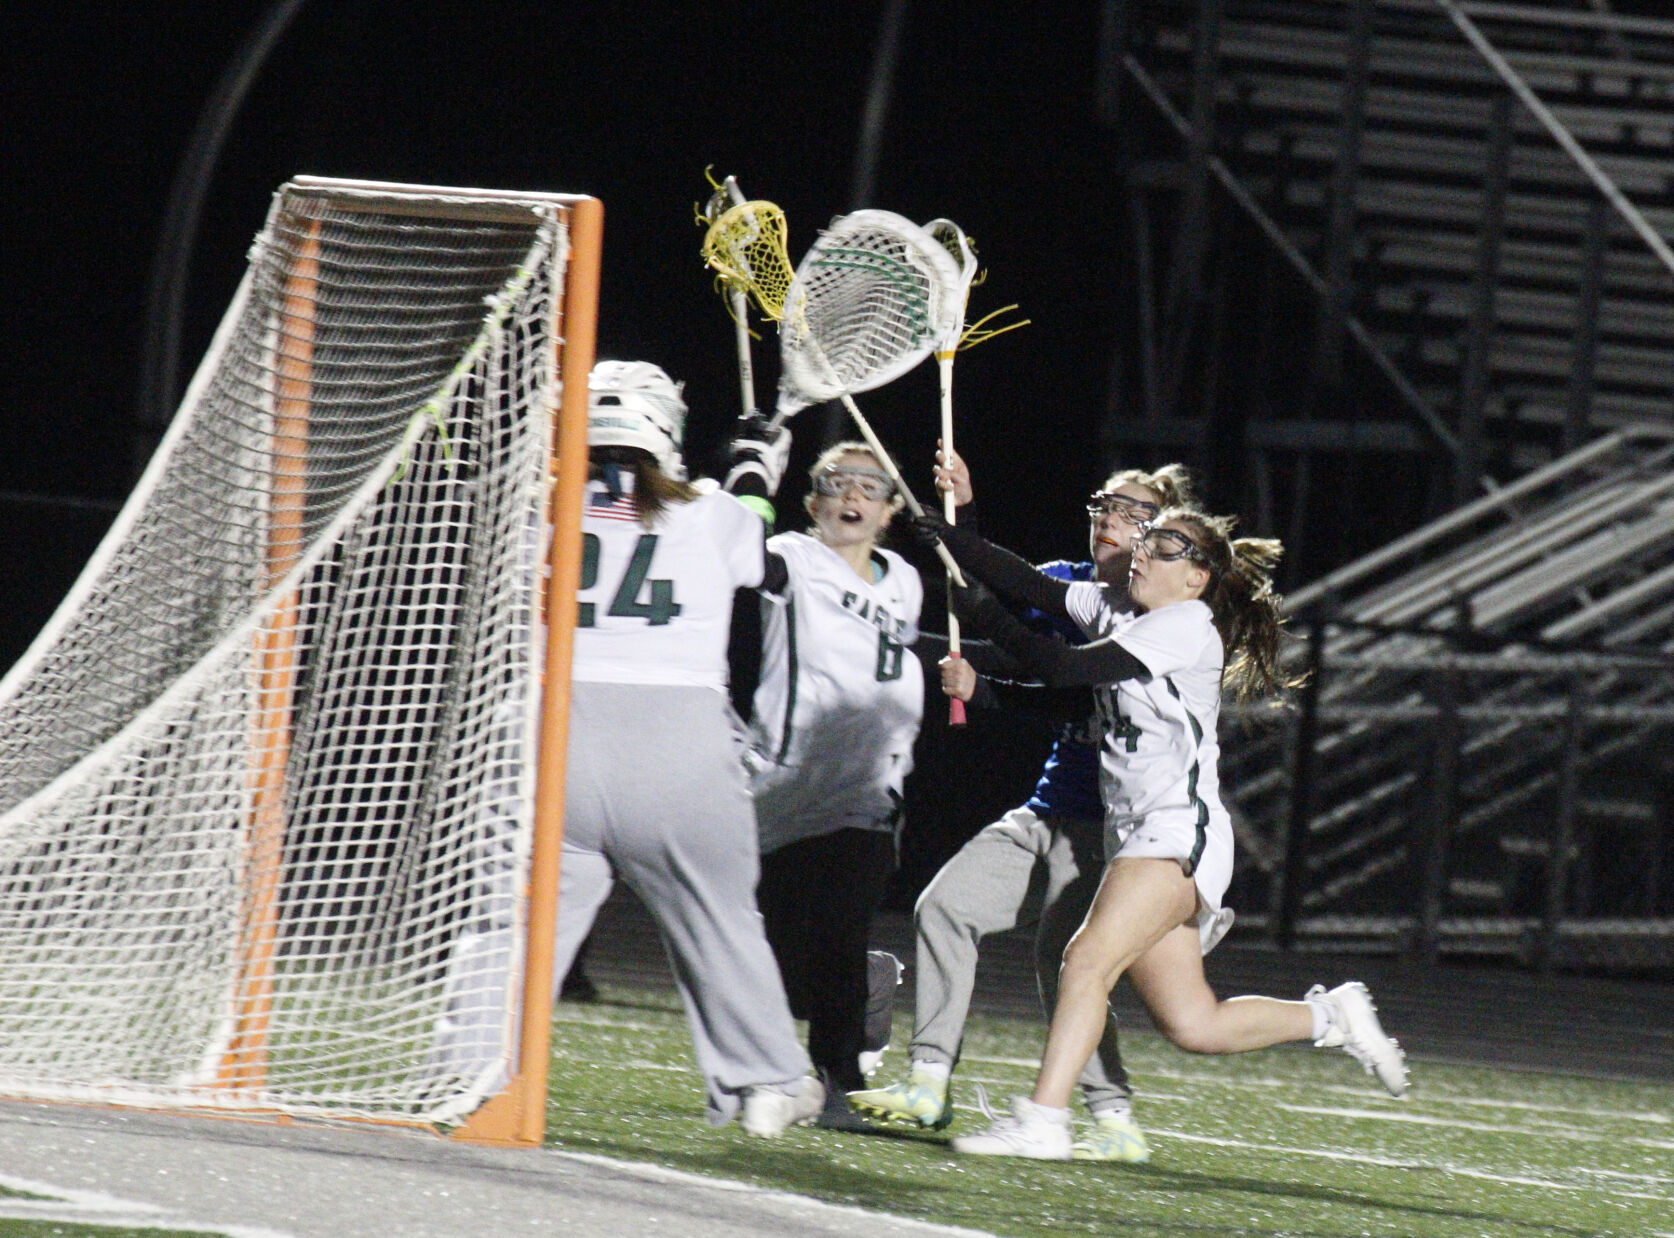 Zionsville Girls Lacrosse Shines in 18-8 Victory: Coach Elefante Praises Leadership and Offensive Power